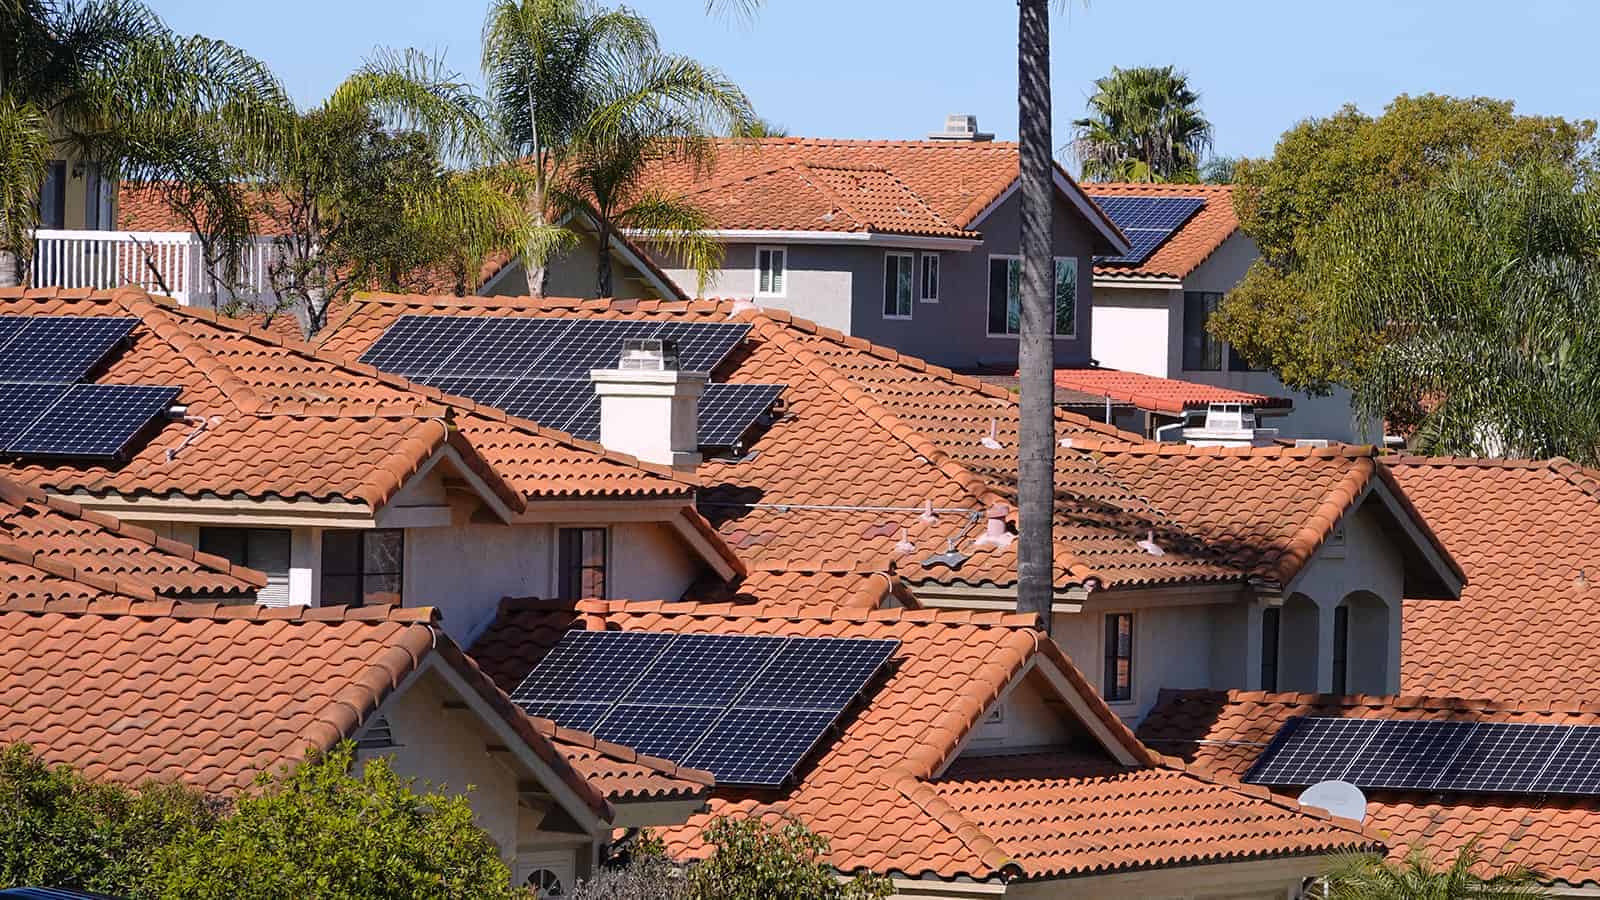 Rooftop Solar Panels May Help Climate Change, According to Science